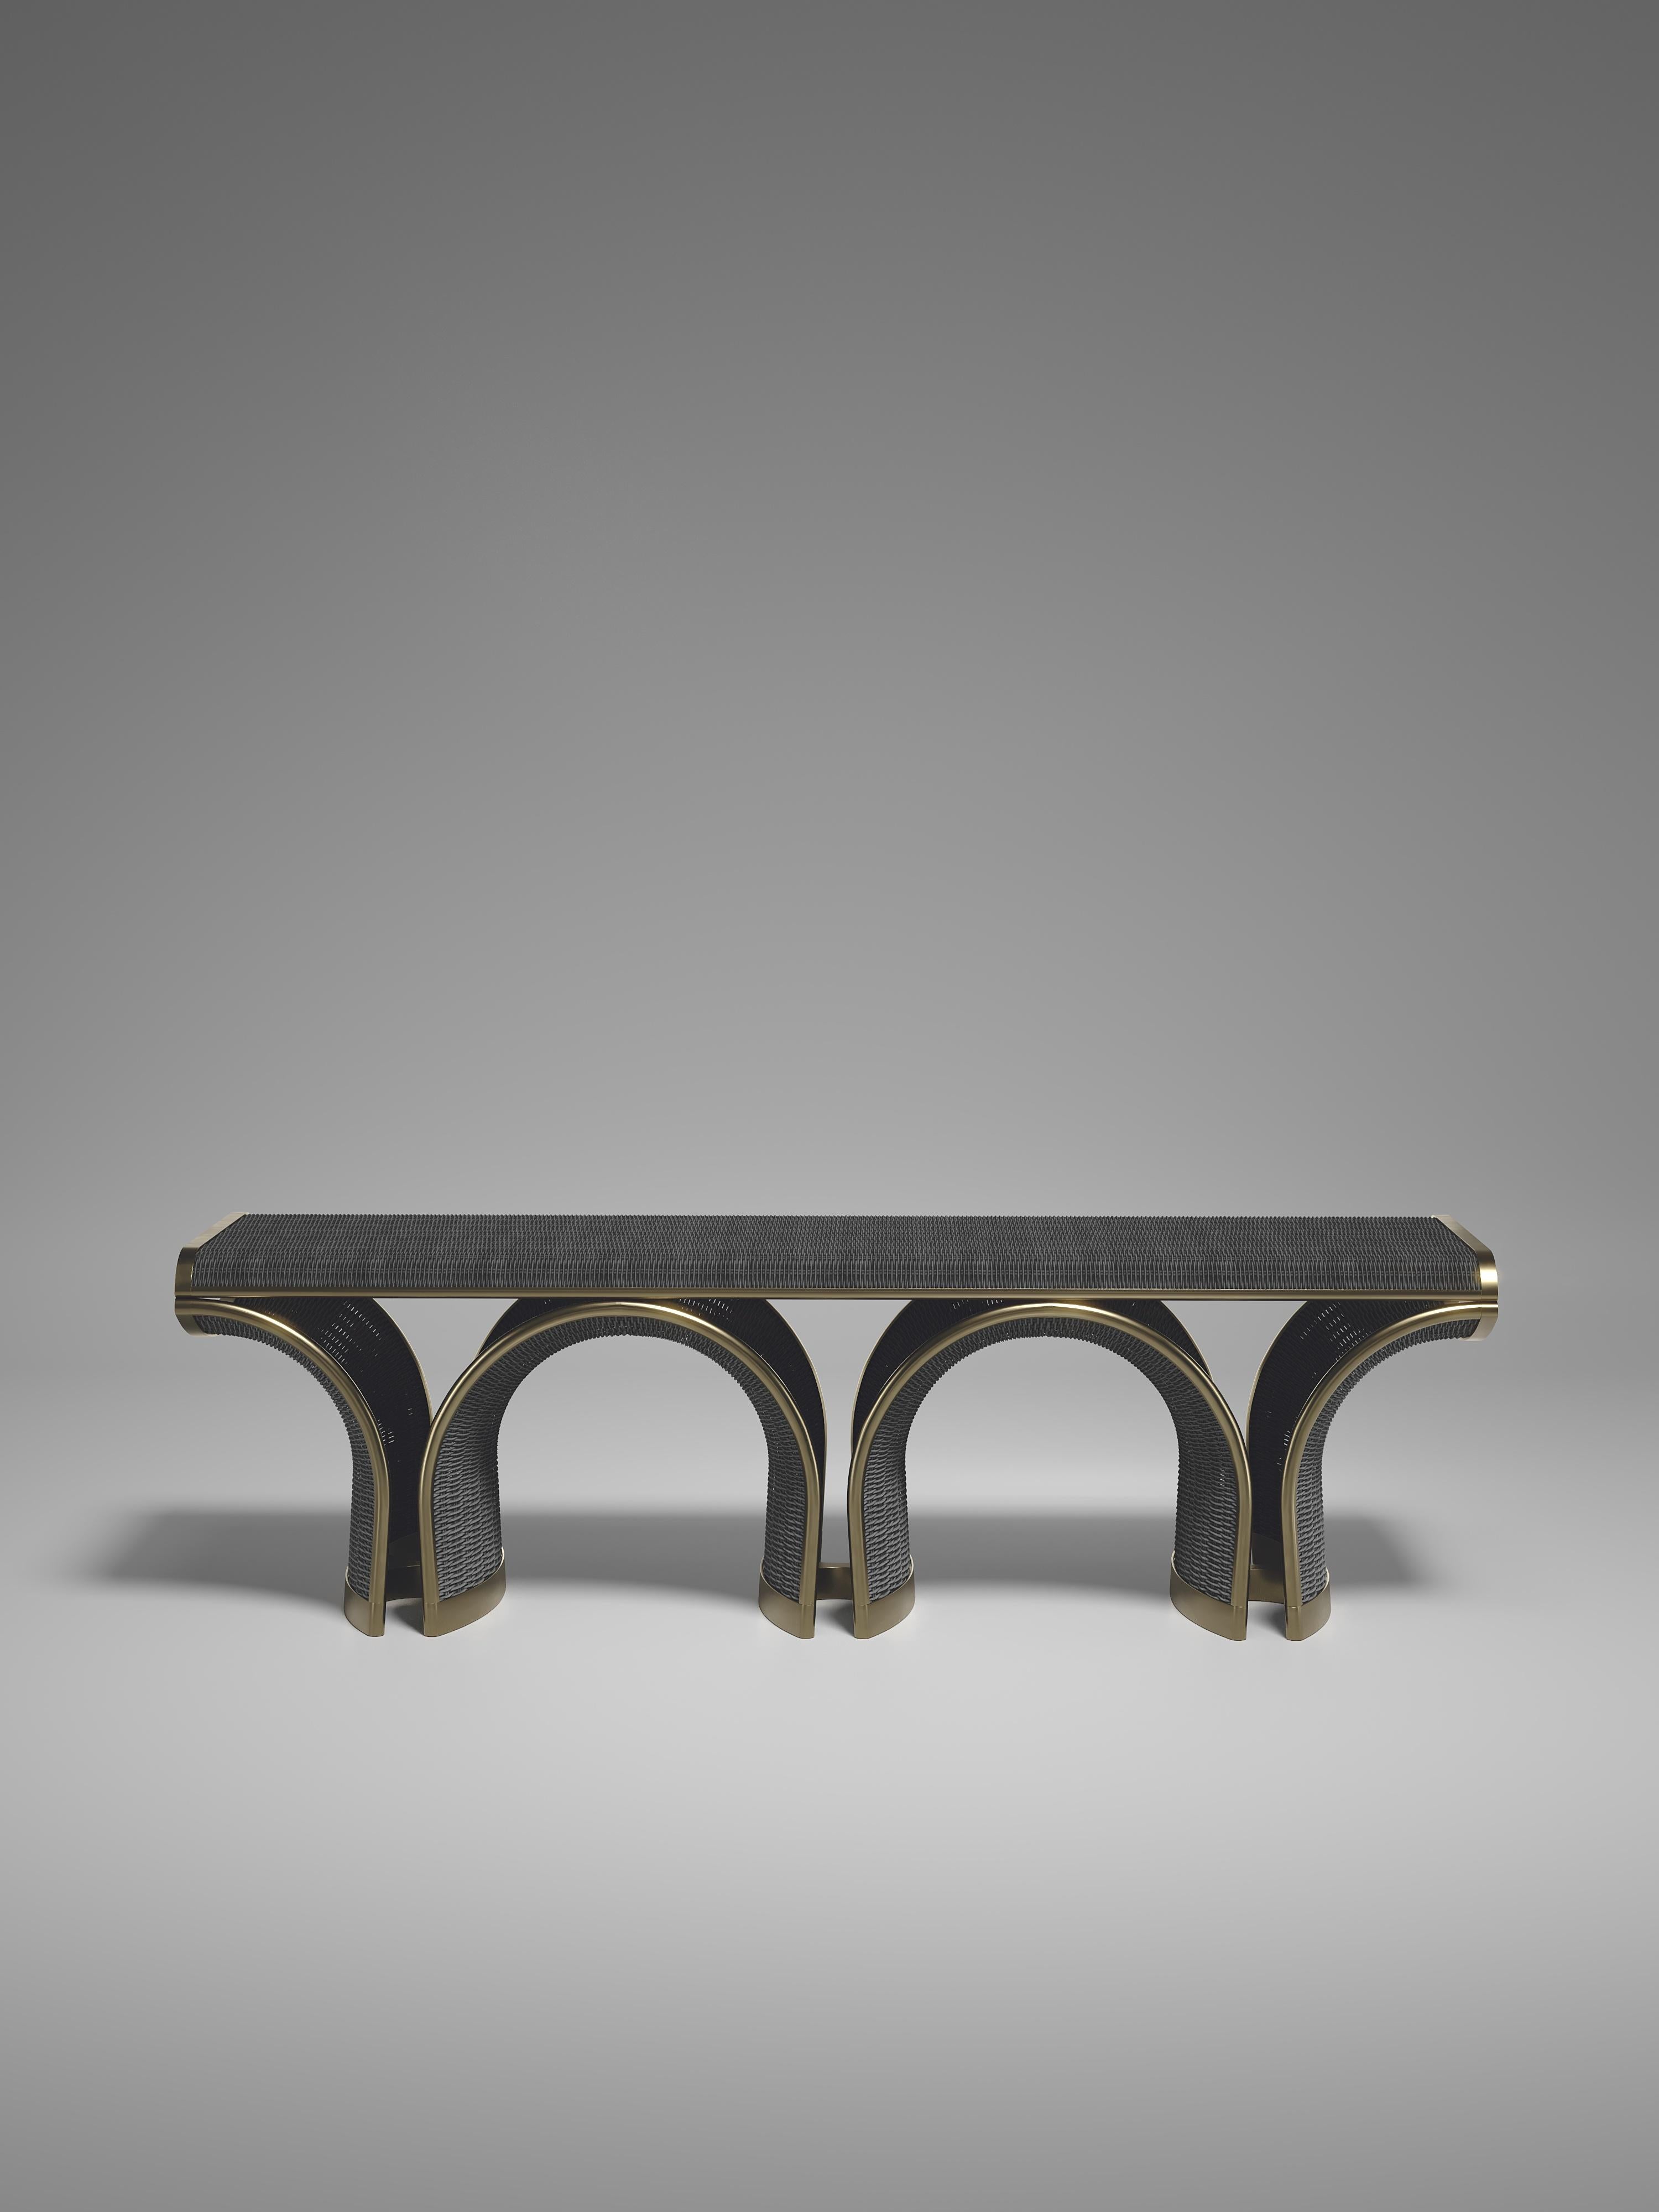 The Nymphea Bench by R & Y Augousti is a part of their new Rattan capsule launch. The piece explores the brand's iconic DNA of bringing old world artisanal craft into a contemporary and utterly luxury feel. This seating piece is done in a black